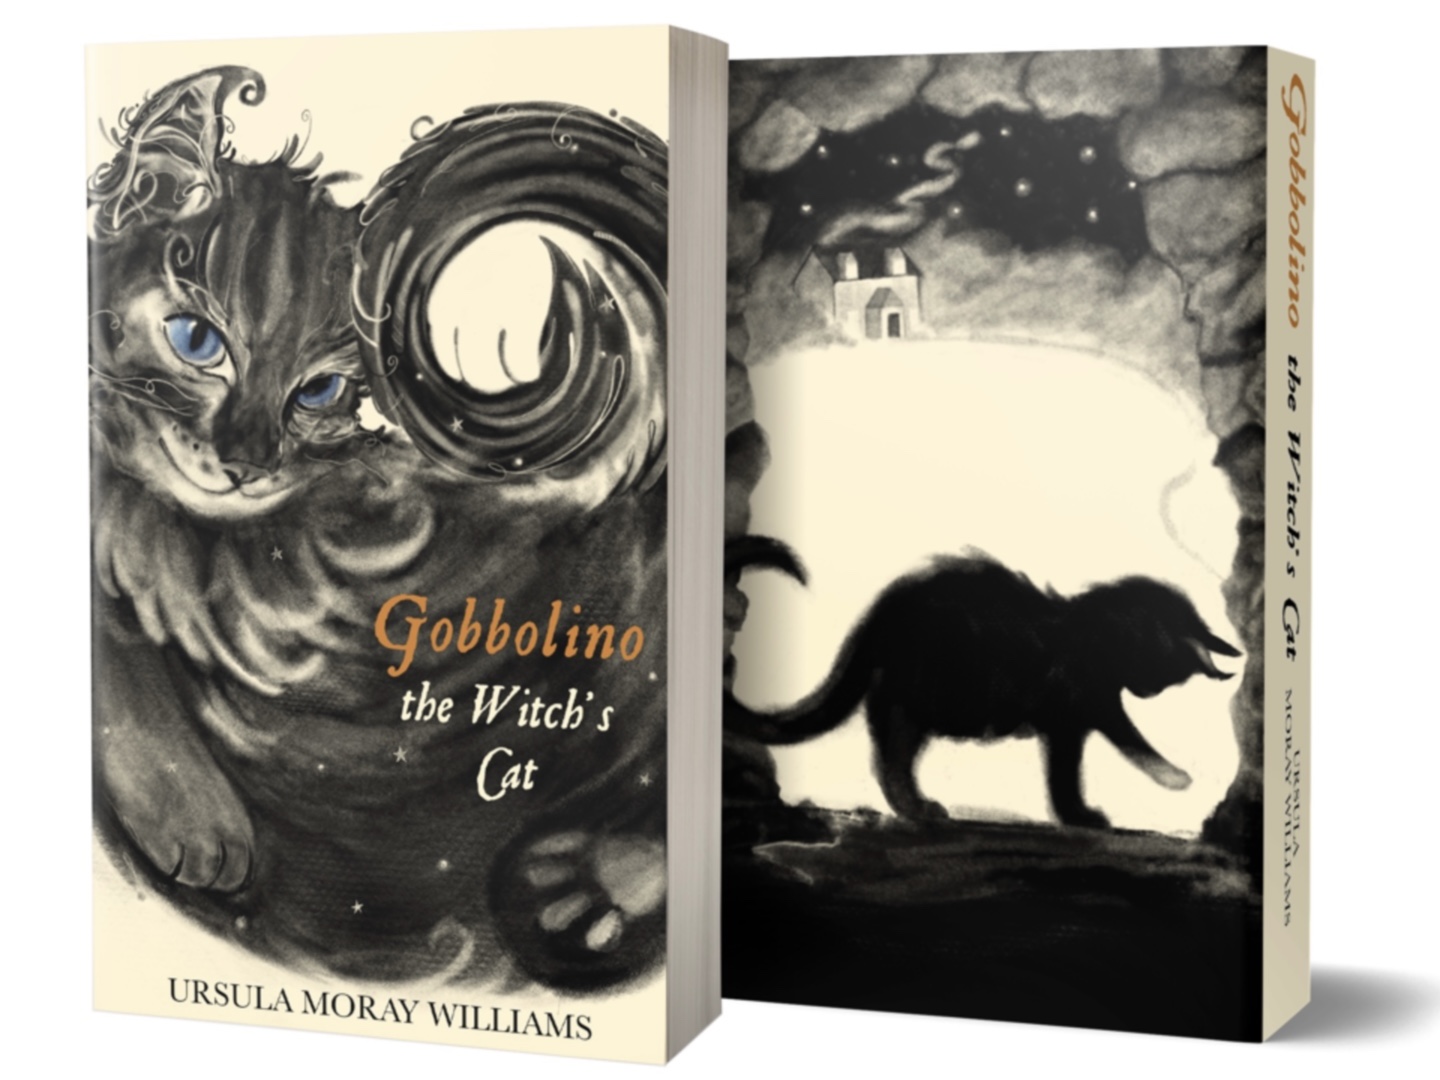 Fron and back covers of Gobbolino the Witch's Cat featuring images of cat